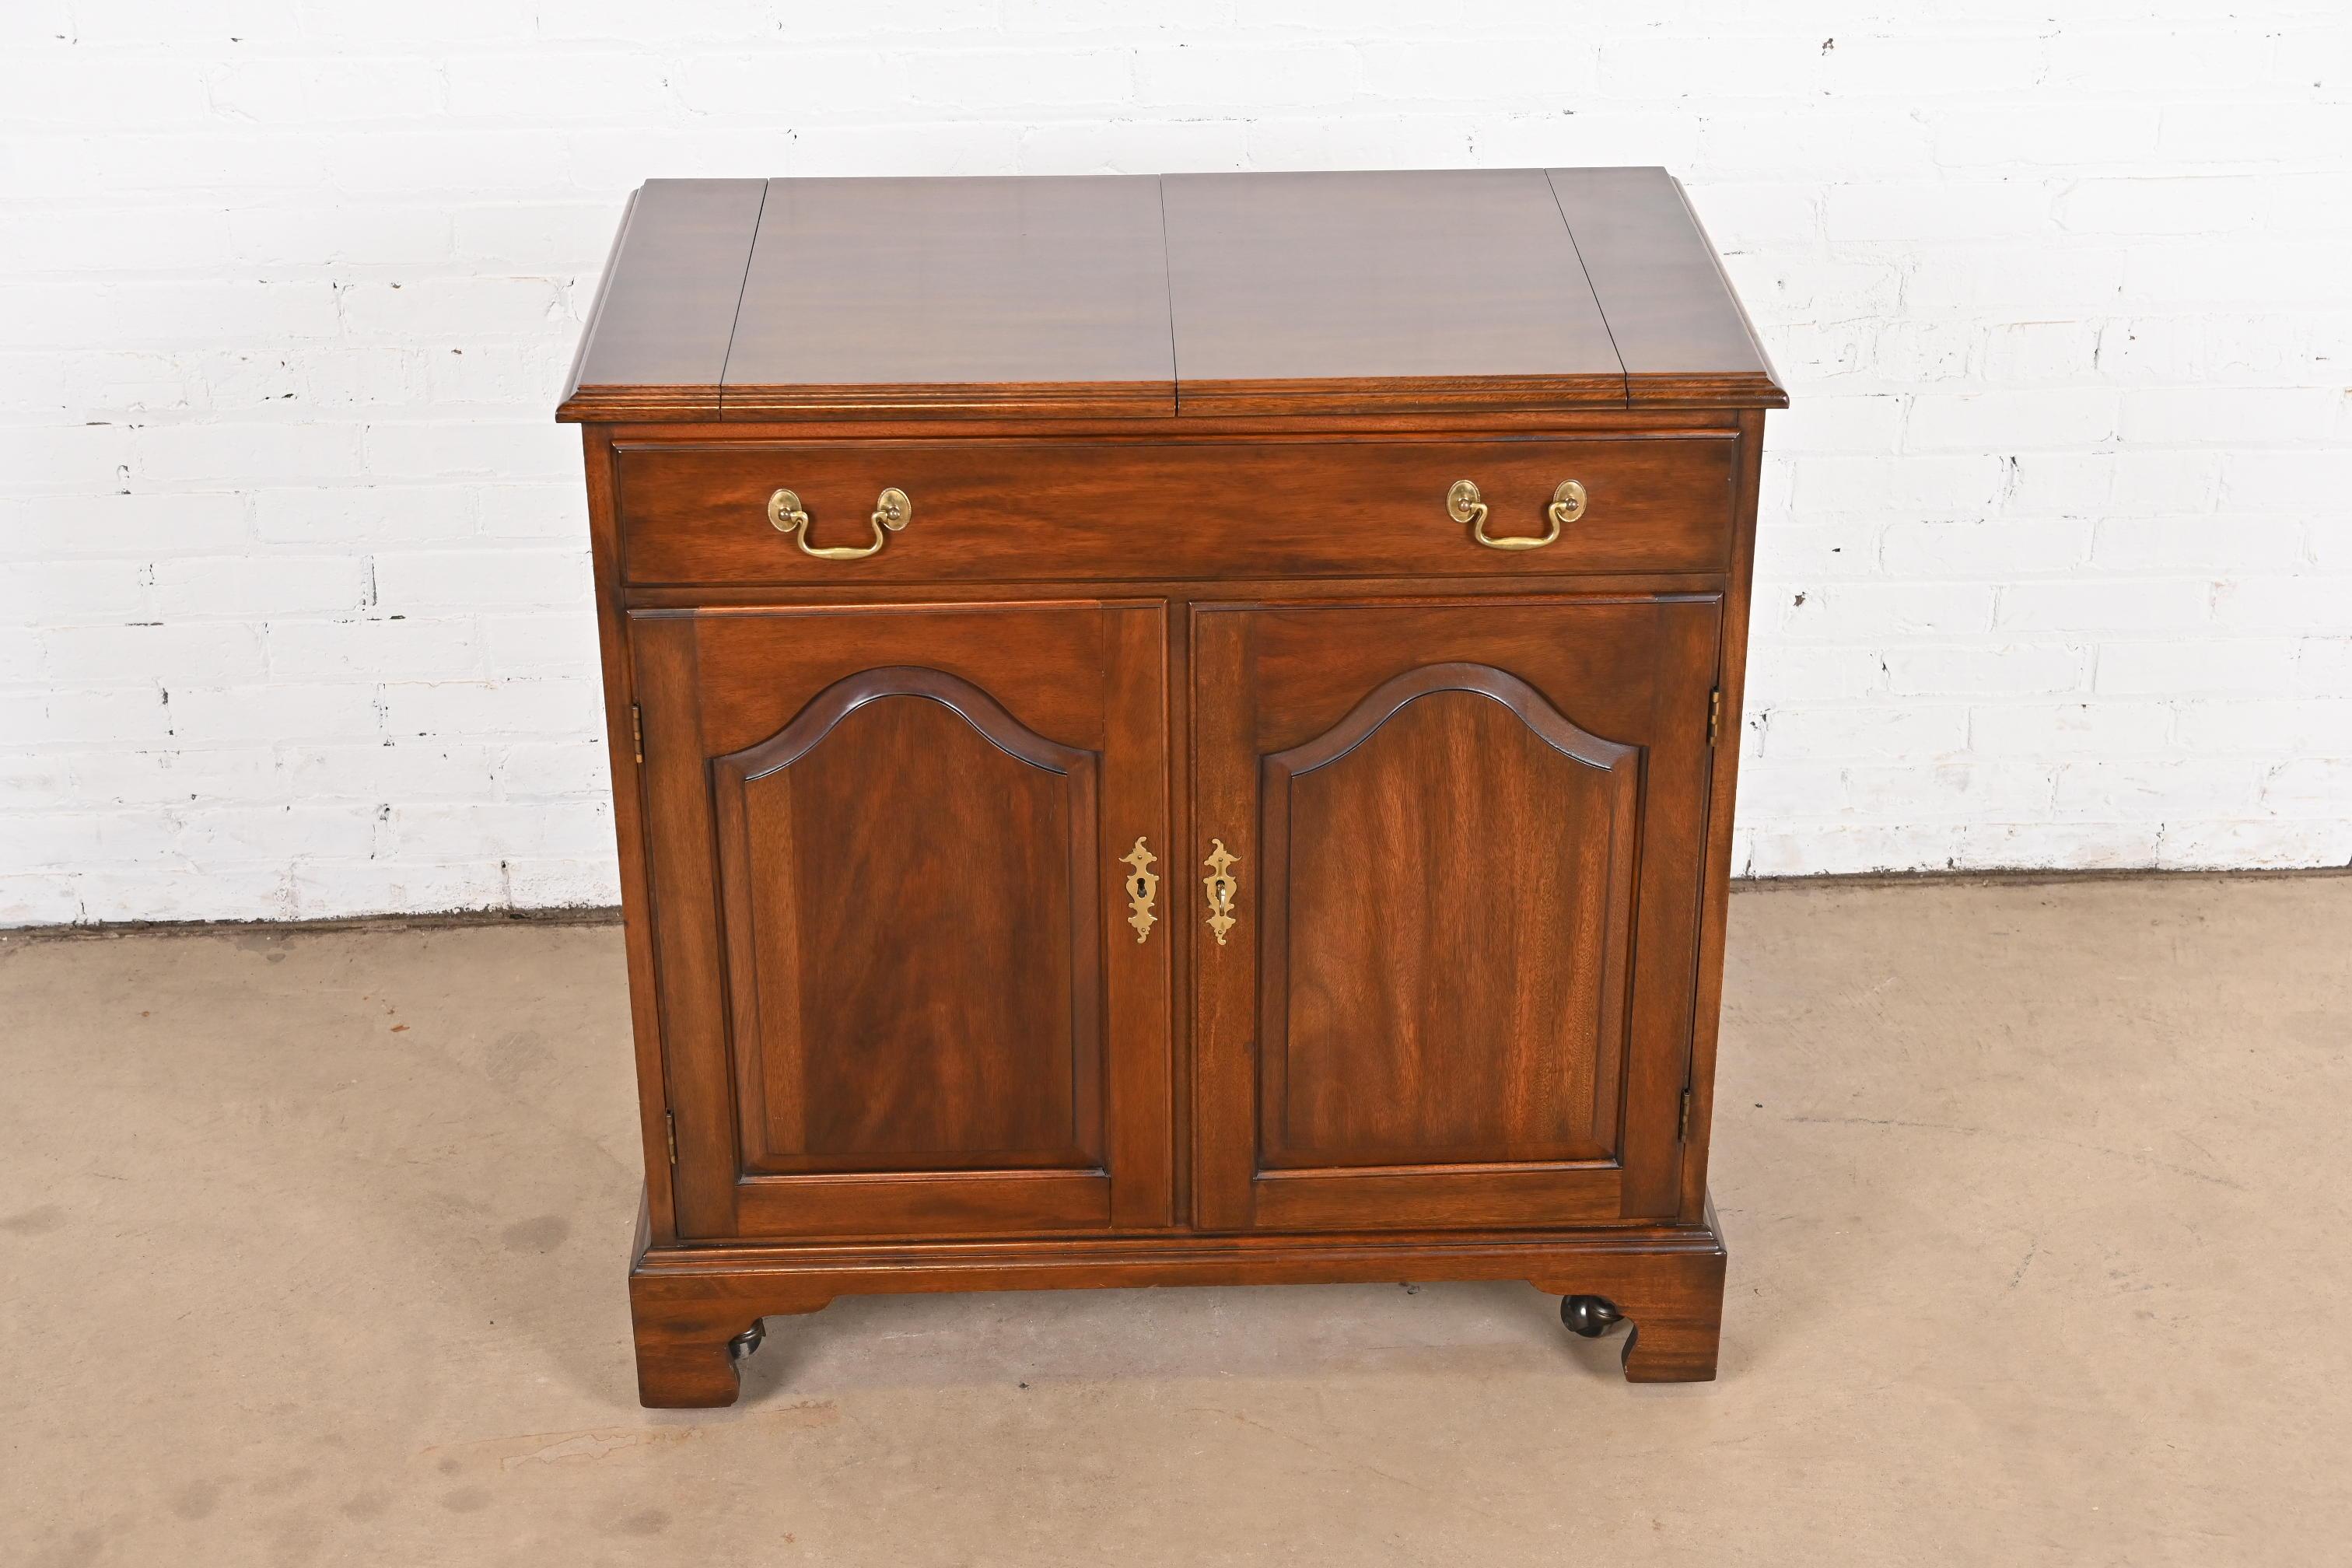 A gorgeous Georgian or Chippendale style flip-top rolling buffet server or bar cabinet

By Henkel Harris

USA, 1974

Solid mahogany, with original brass hardware. Cabinet locks, and key is included.

Measures: 34.25